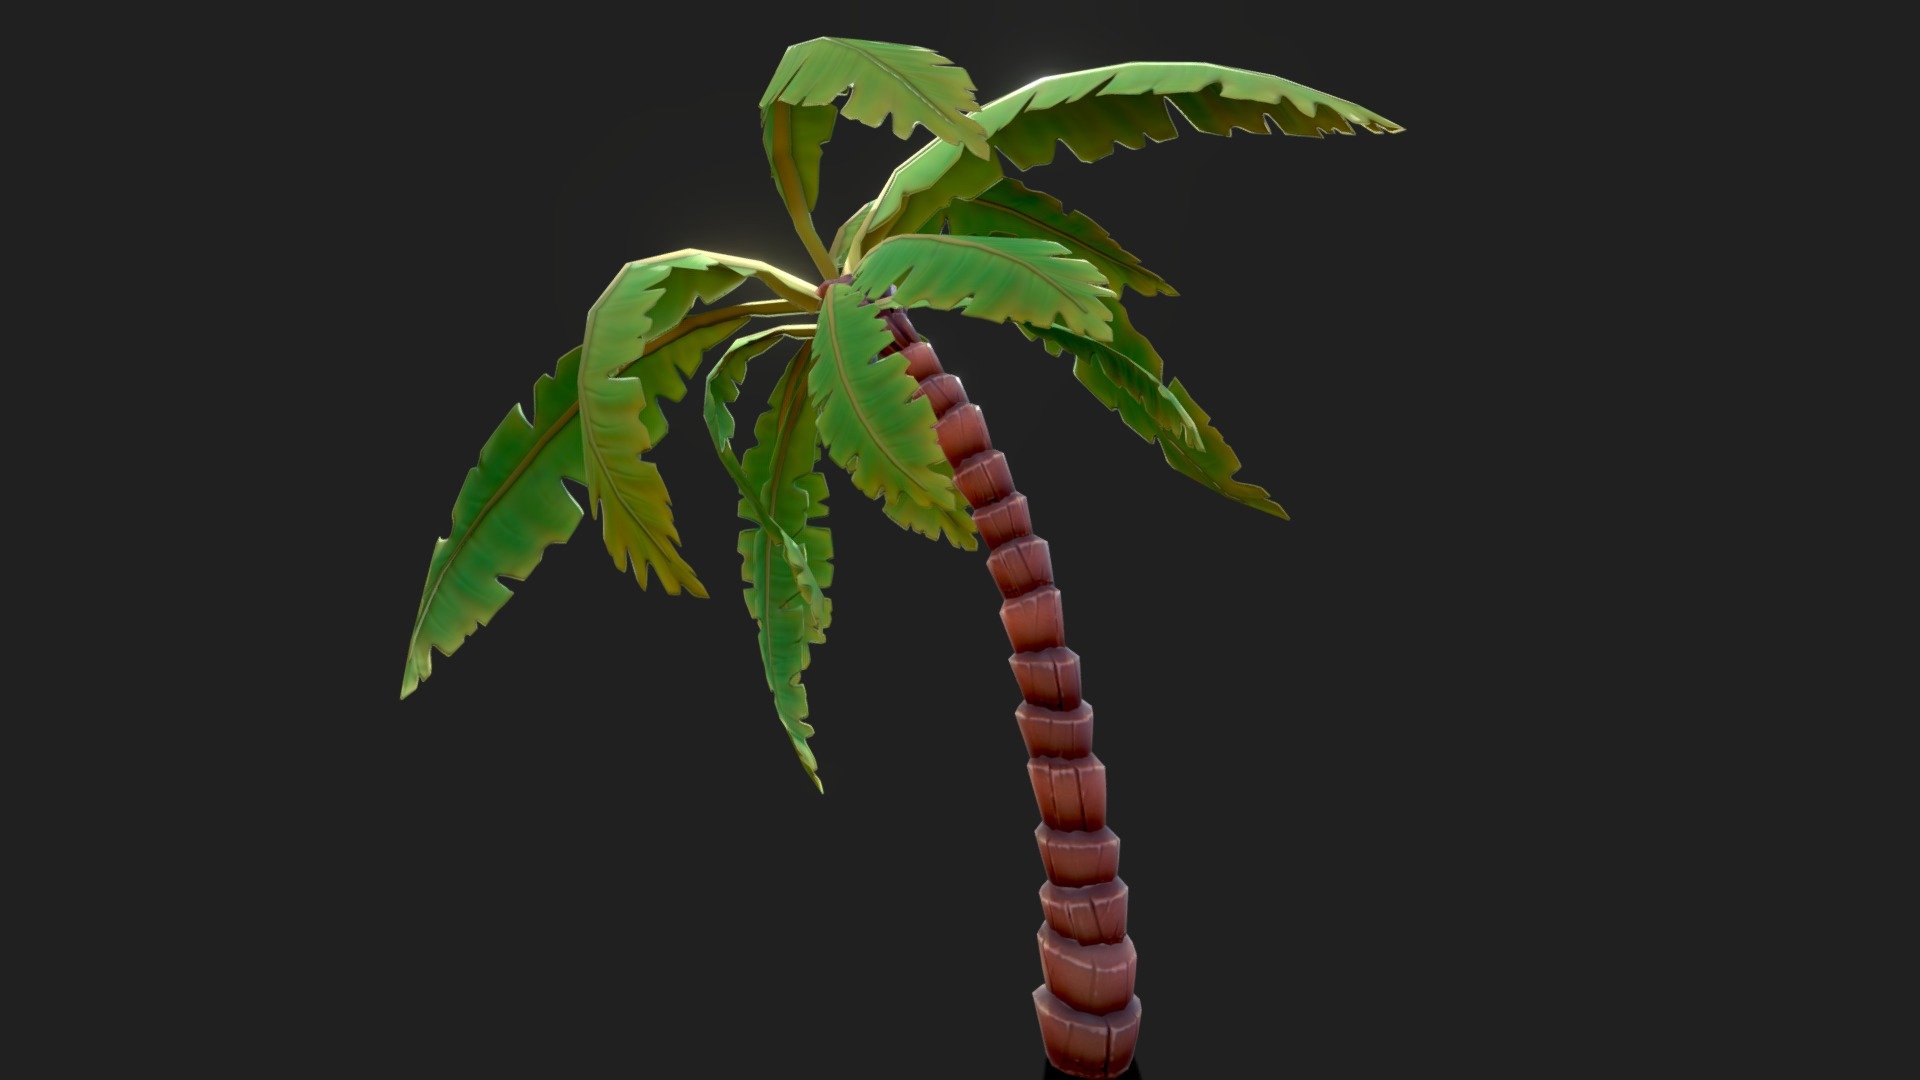 Originally modeled in Cinema 4D R 21



Maps for Cartoon Palm Tree




BaseColor

Metallic

Roughness

Normal

AO

Opacity



SCALE:
- Model at world center and real scale:
       Metric in centimeter
       1 unit = 1 centimeter



Texture resolution 2048x2048
Texture format PNG



Poly Count :
Polygon Count - 2099
Vertex Count - 3174
No N-Gons - Cartoon Palm Tree - Buy Royalty Free 3D model by zames1992 3d model